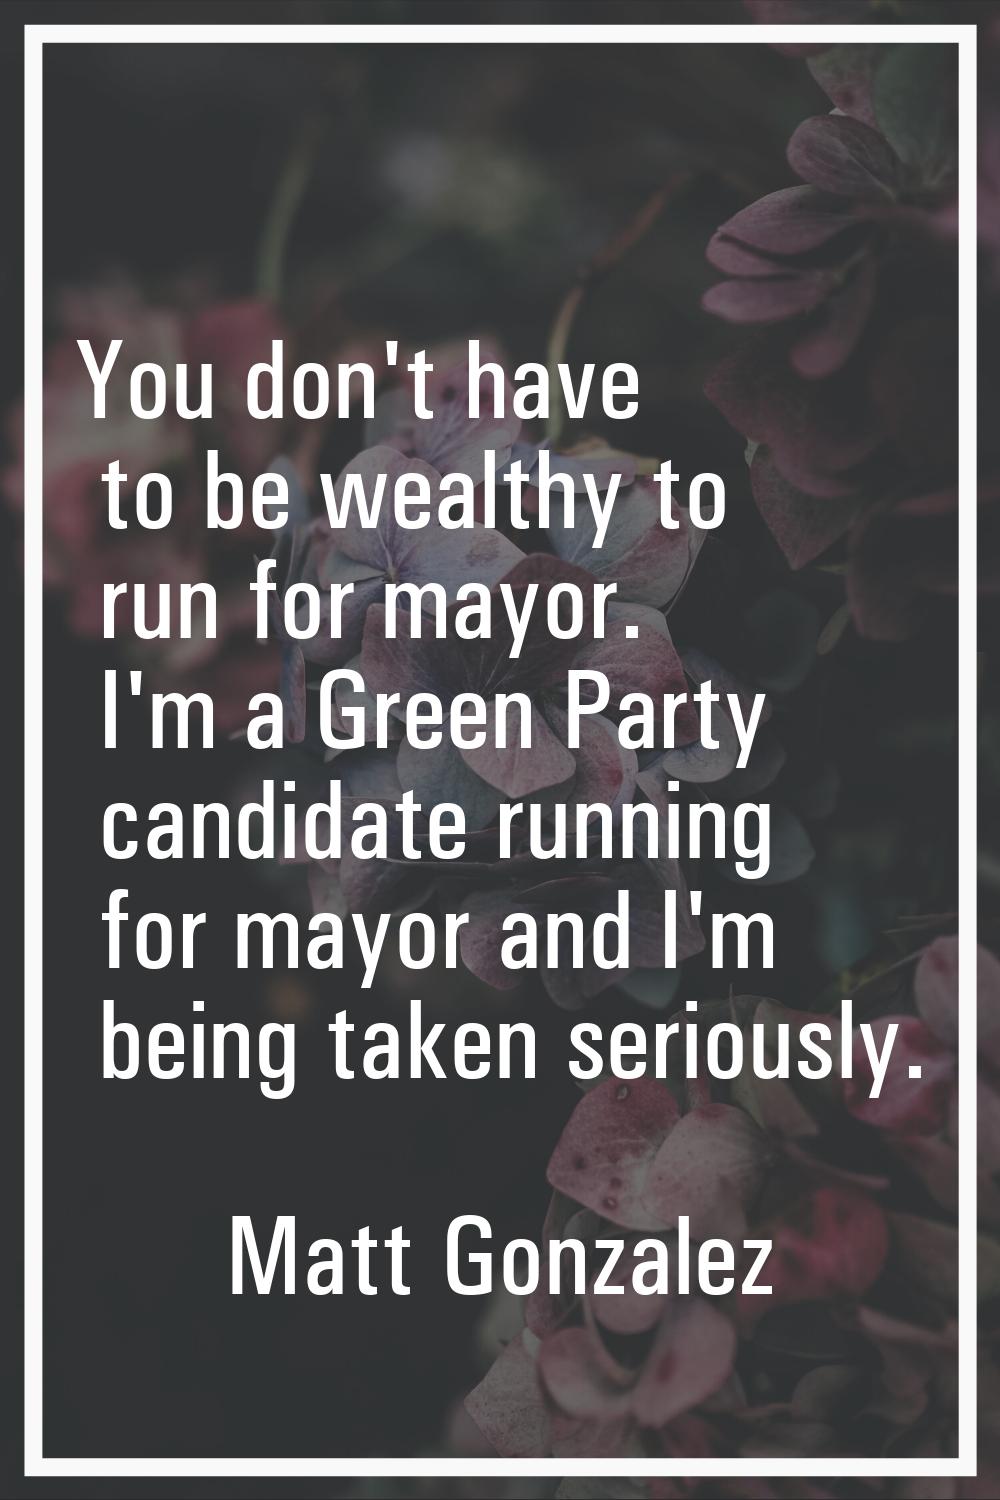 You don't have to be wealthy to run for mayor. I'm a Green Party candidate running for mayor and I'